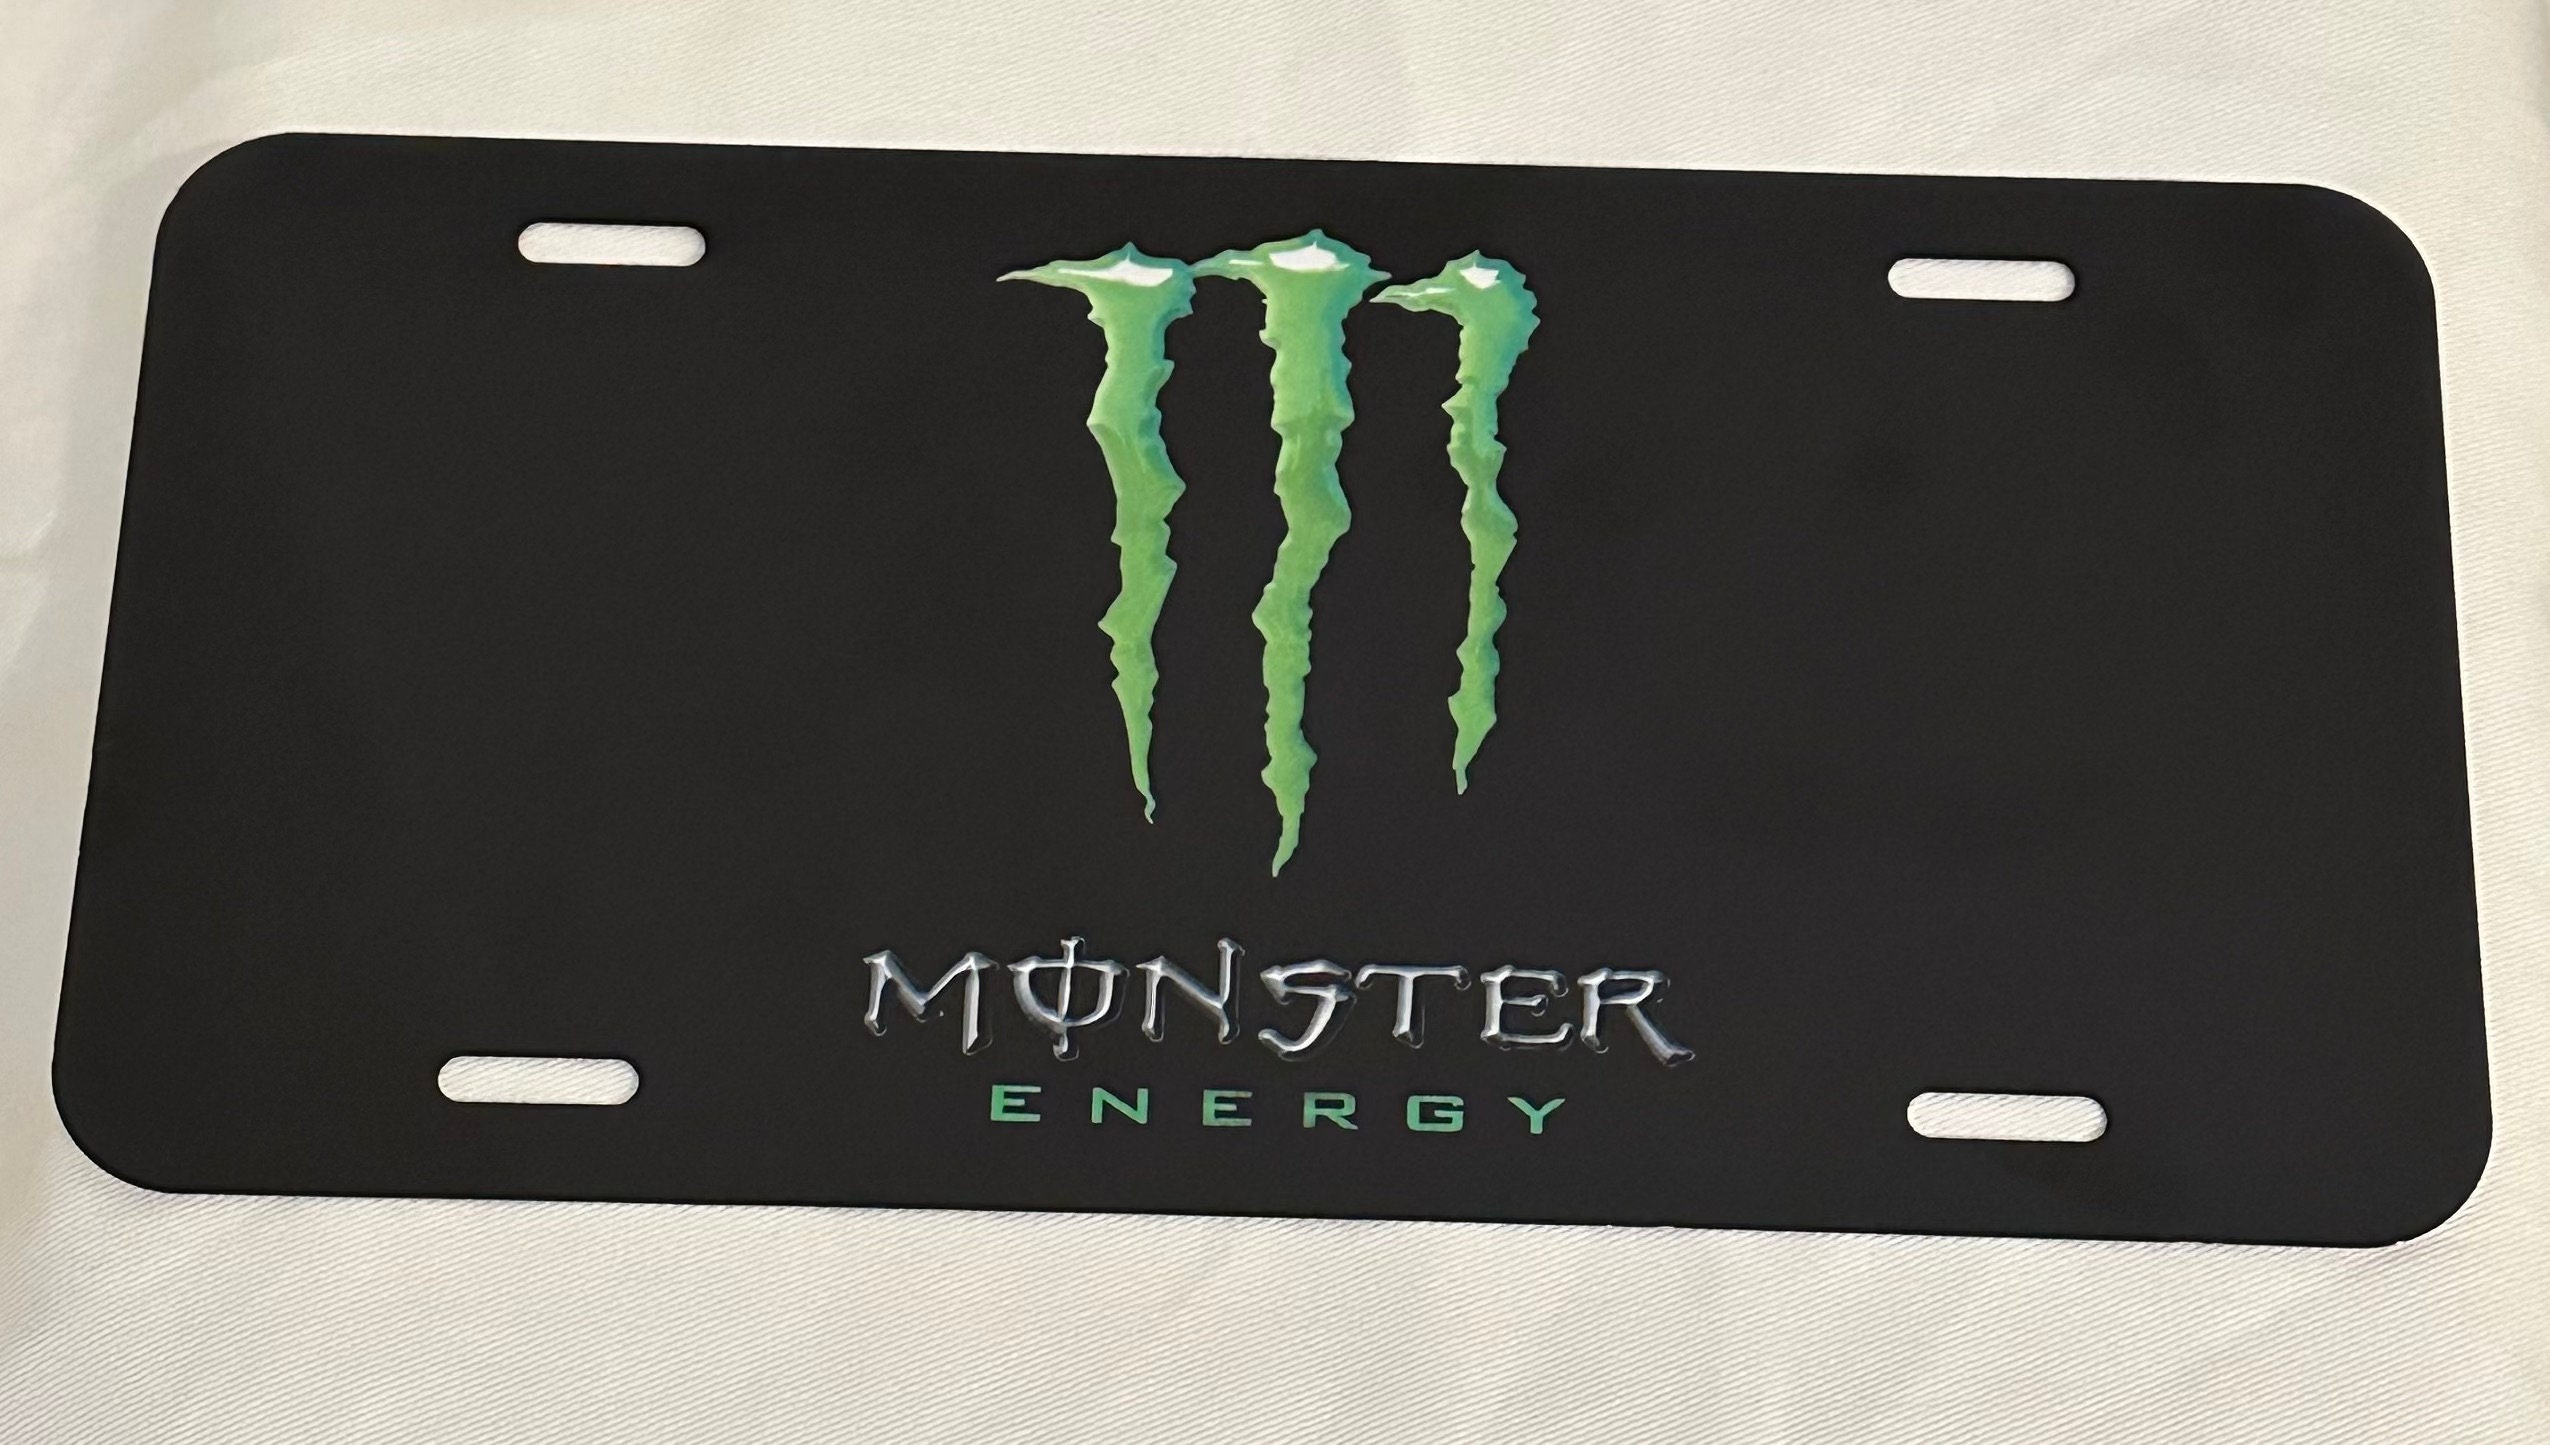 10 Monster Energy Stickers Decals 5x3.75